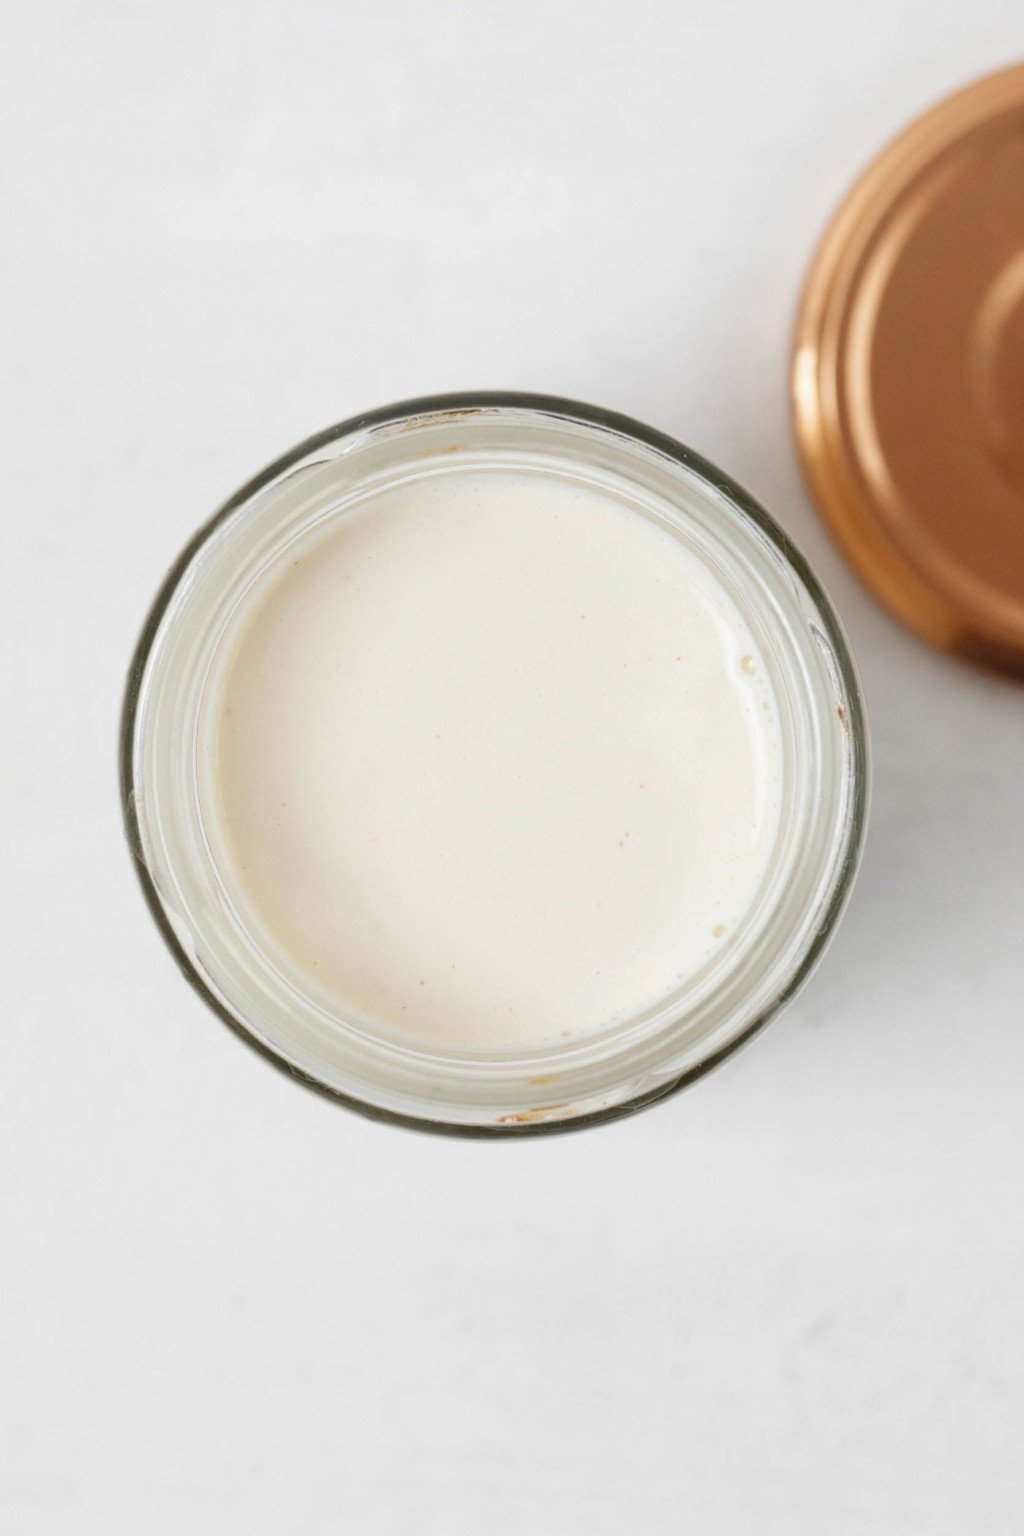 A mason jar with a metal lid is resting on a white surface. The jar contains a white sauce.